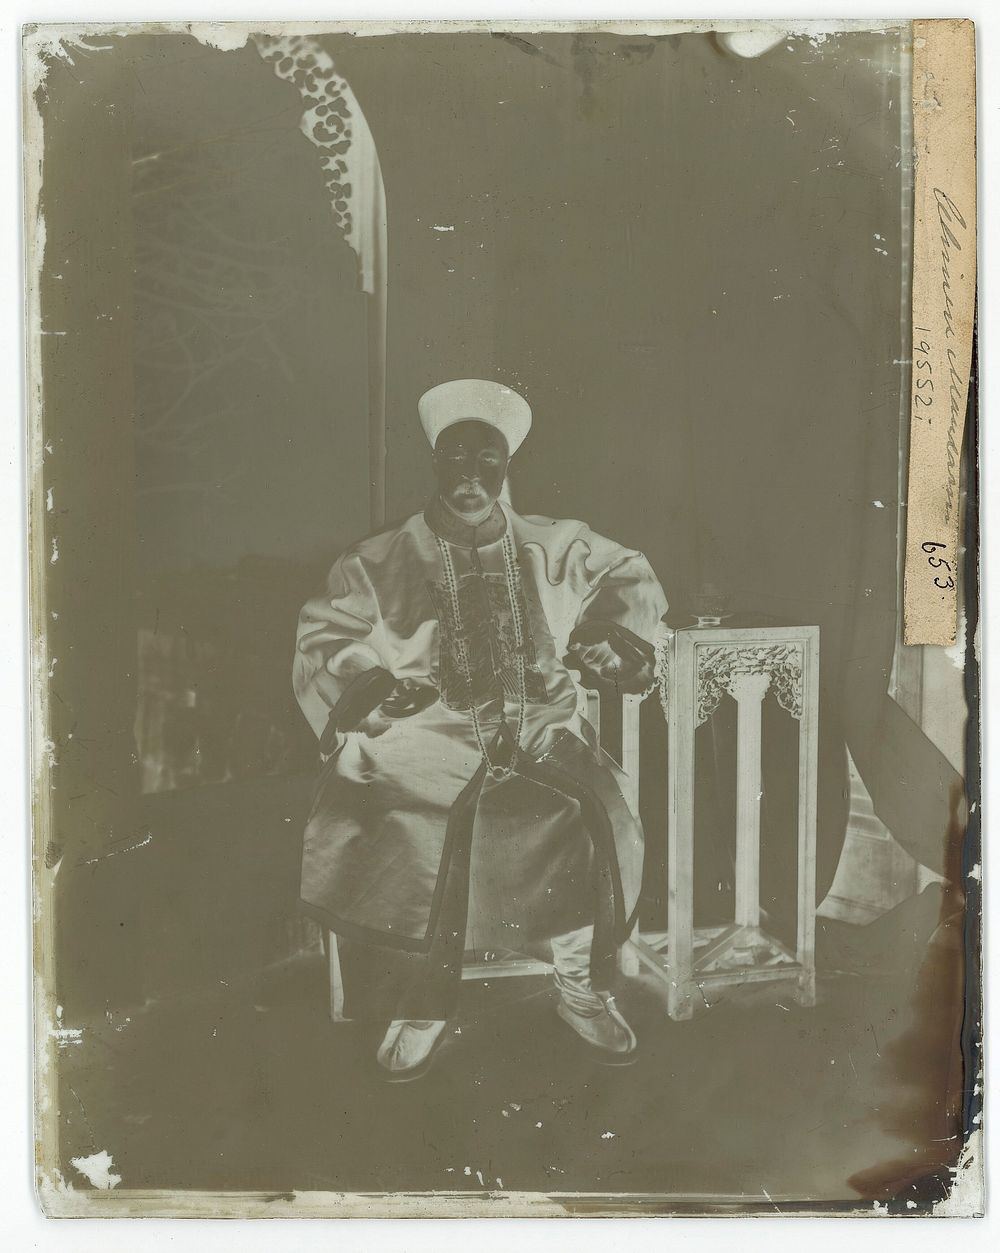 A Mandarin official, Late Qing China. Photograph by John Thomson, 1869.